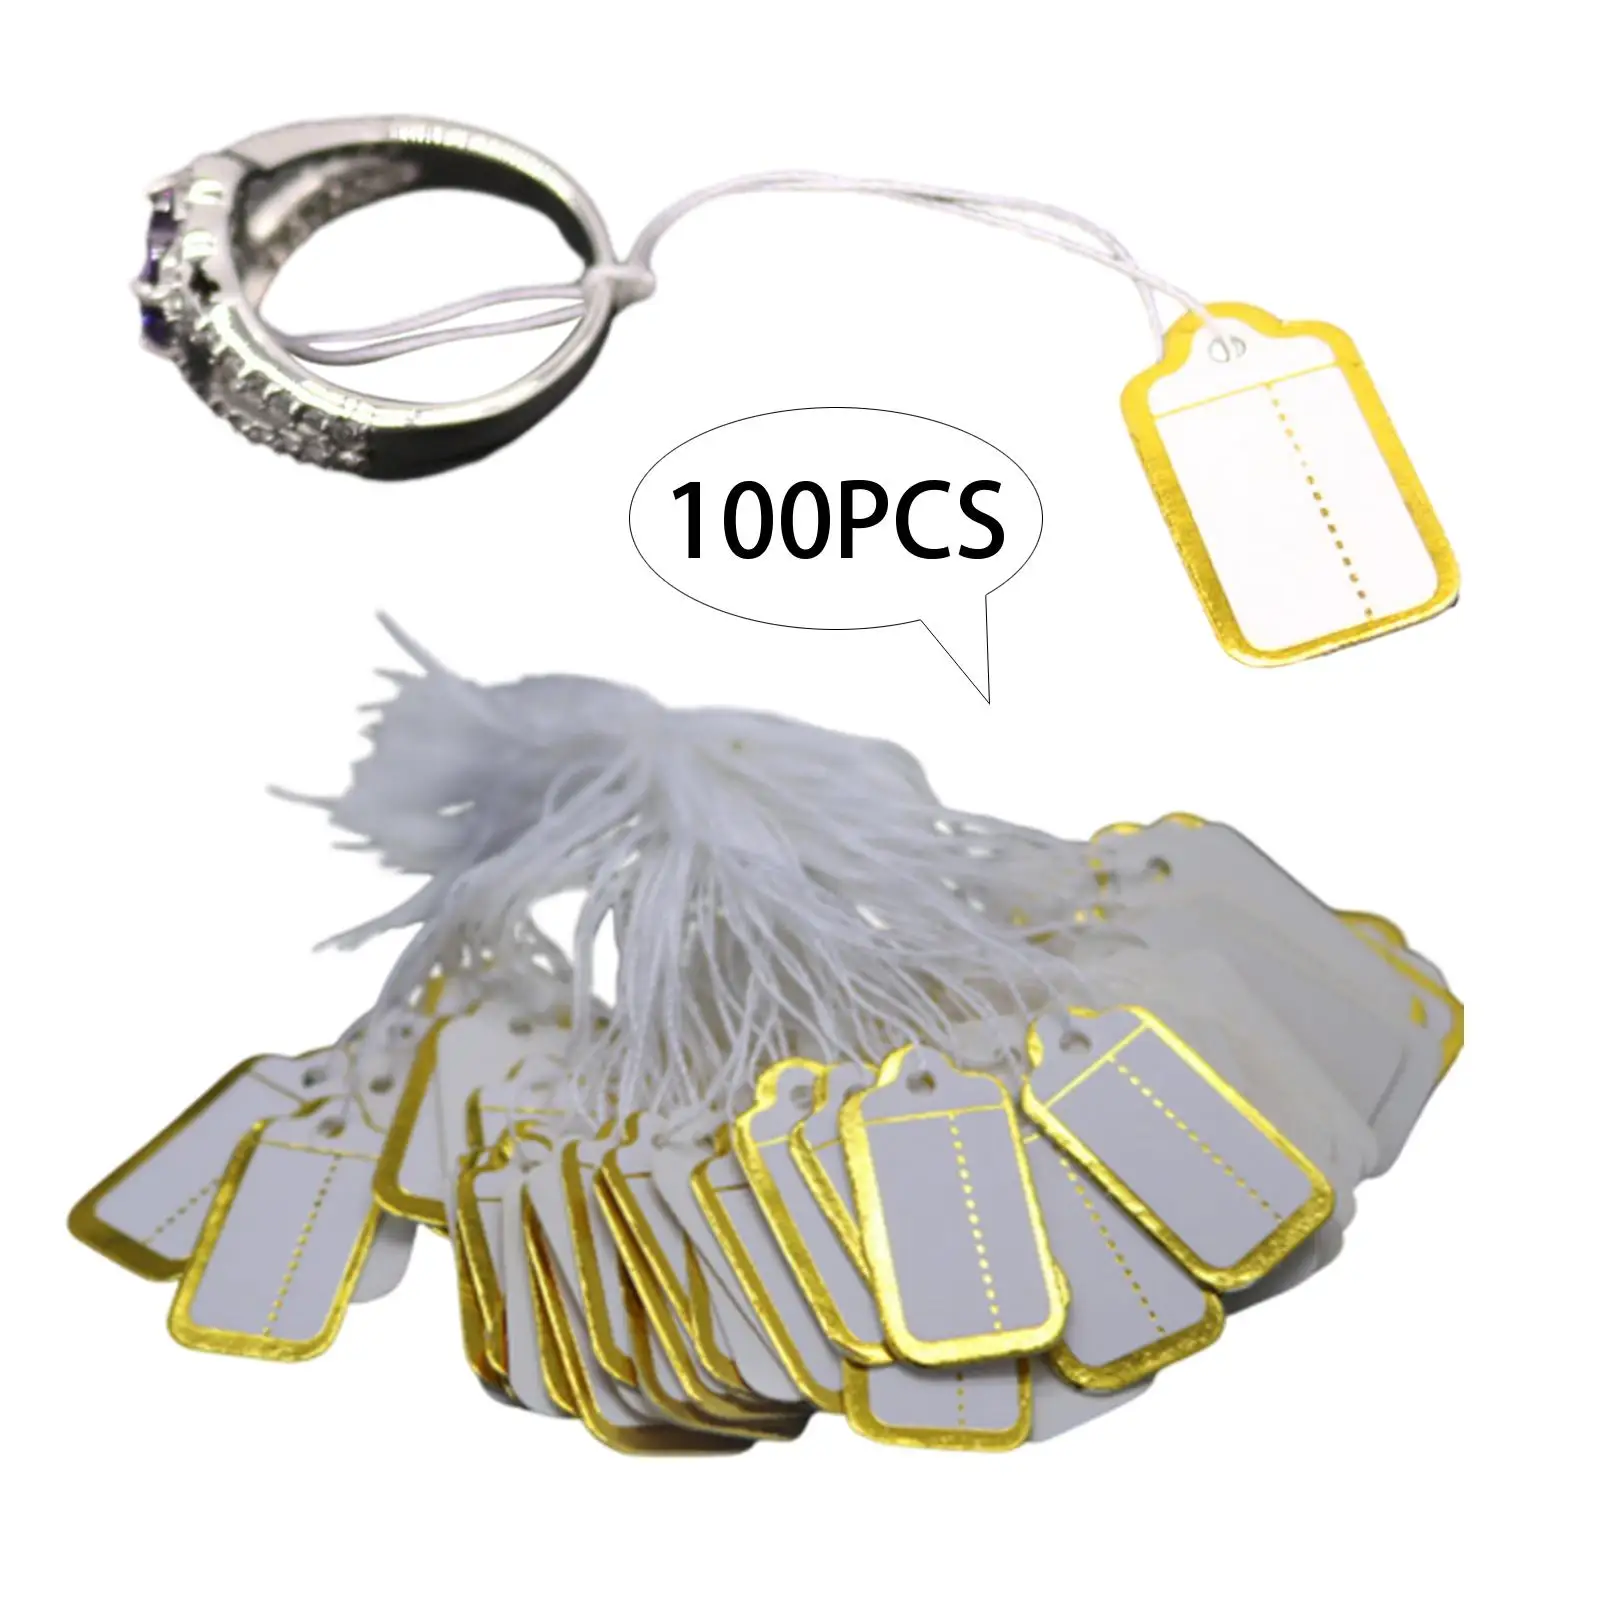 100Pcs Price Tags with String Attached Labeling Paper Tags Price Display Tags for Clothing Jewelry Rings Wedding Party Favor